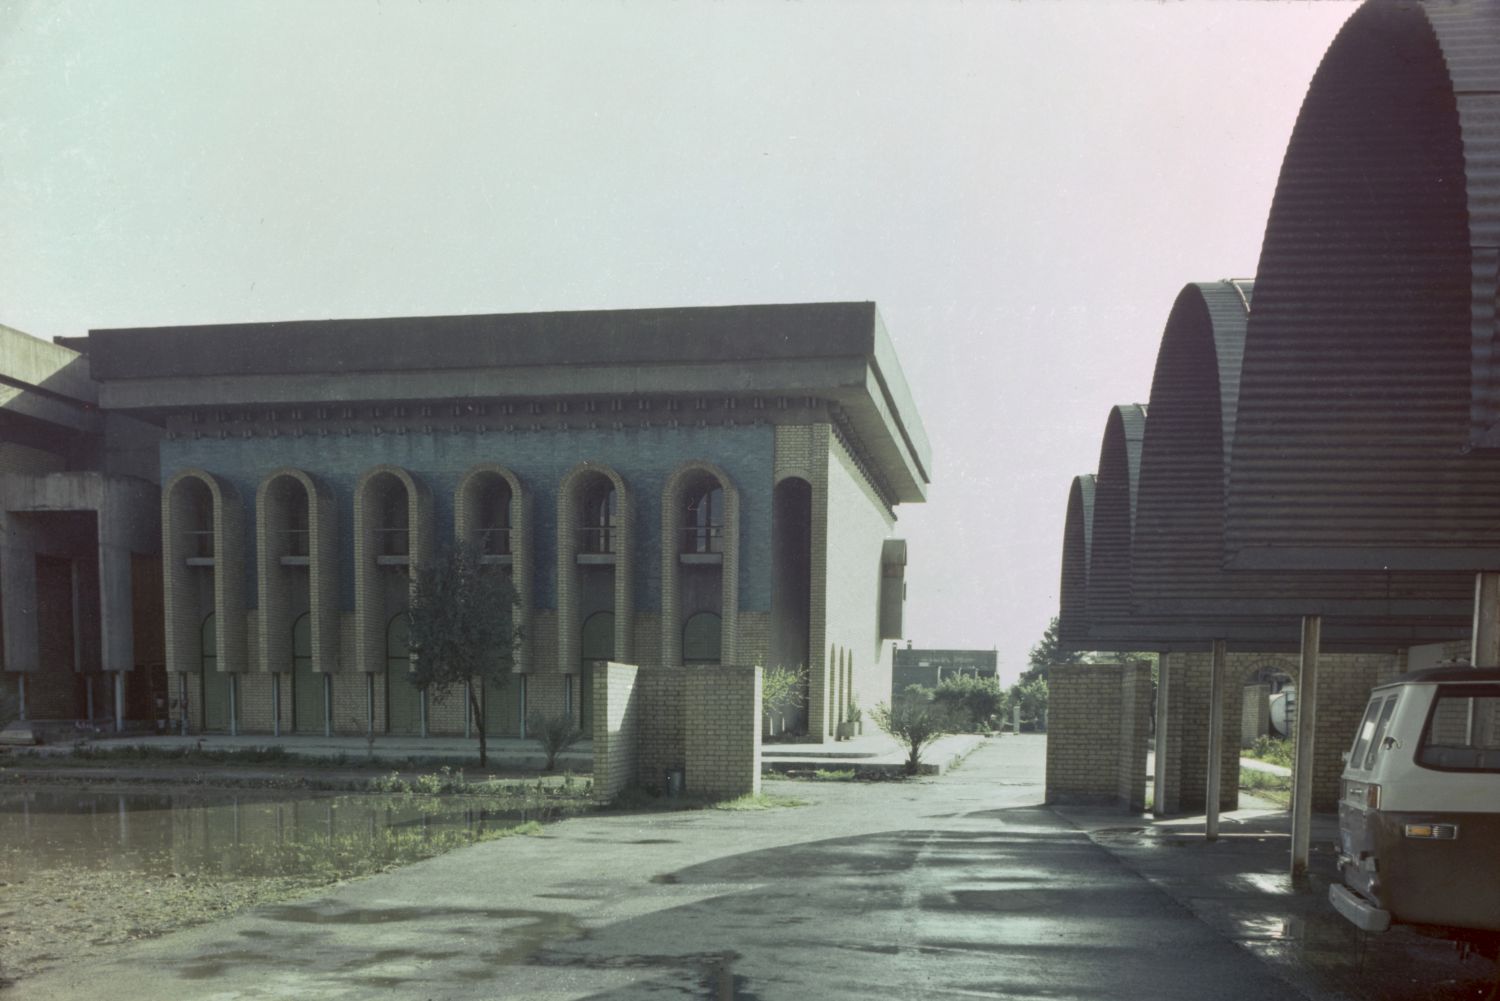 Iraqi Scientific Academy Building - Exterior view, southwest facade, south side. Parking lot visible at right.